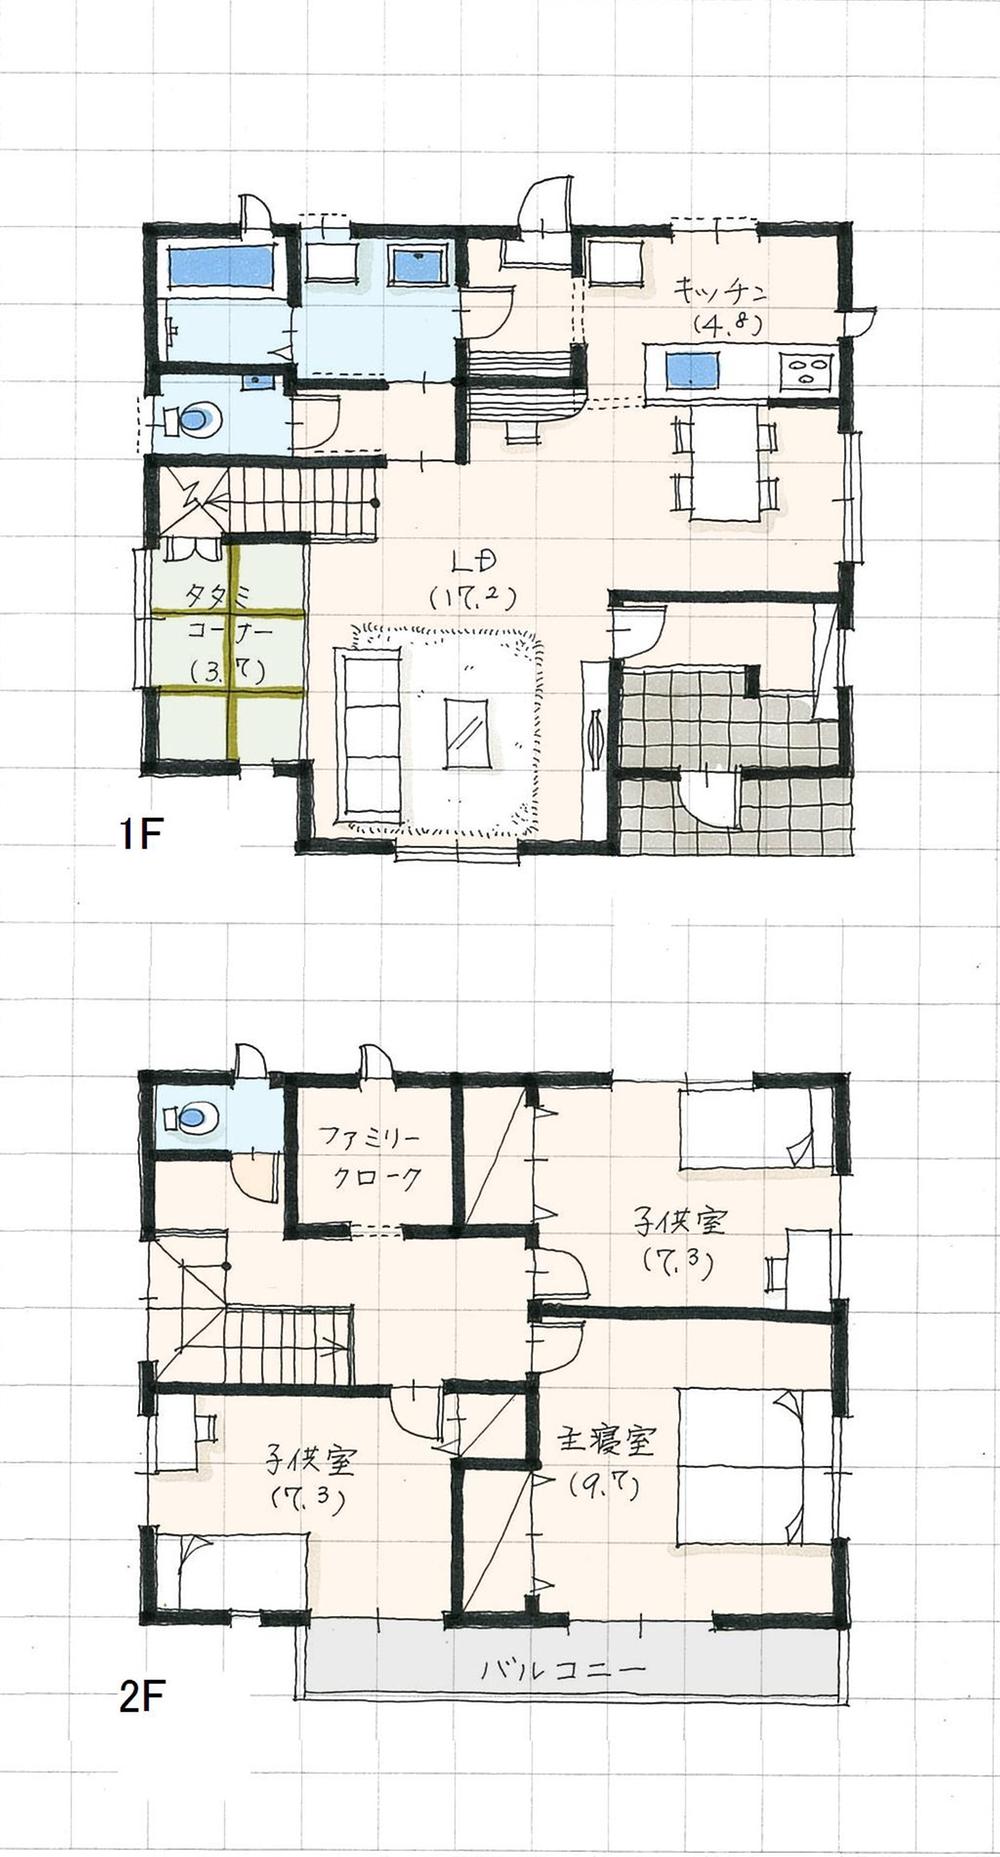 Other building plan example. No. 14 land plan Building floor area of ​​130 sq m (39.25 square meters), Building construction floor area 142.33 sq m (42.97 square meters) At any time sale! 